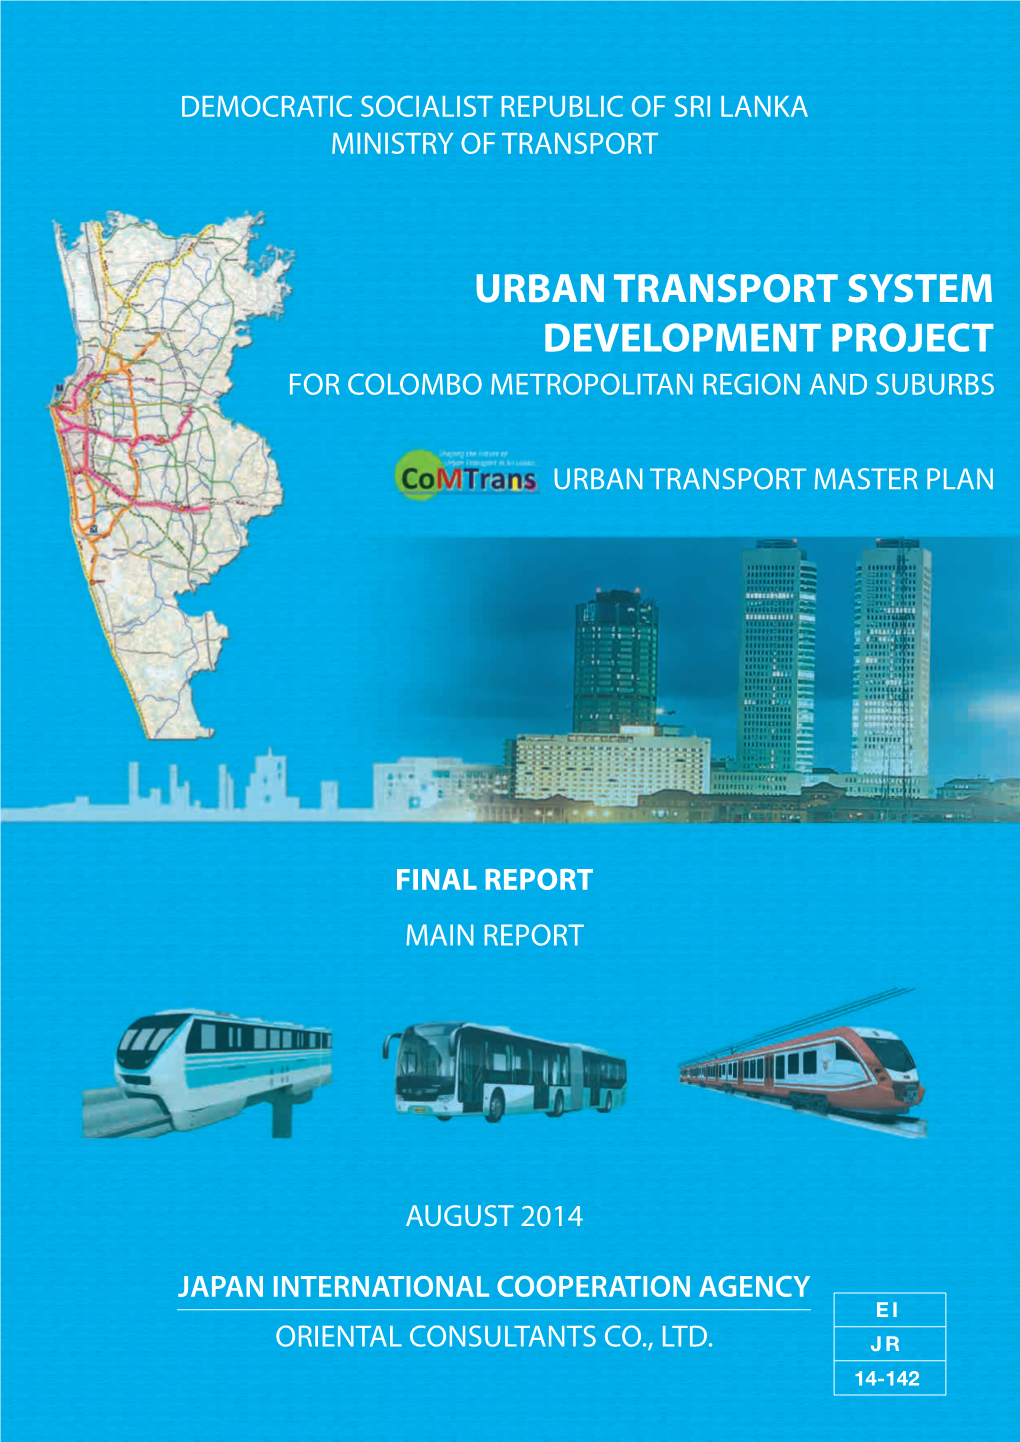 Urban Transport System Development Project for Colombo Metropolitan Region and Suburbs